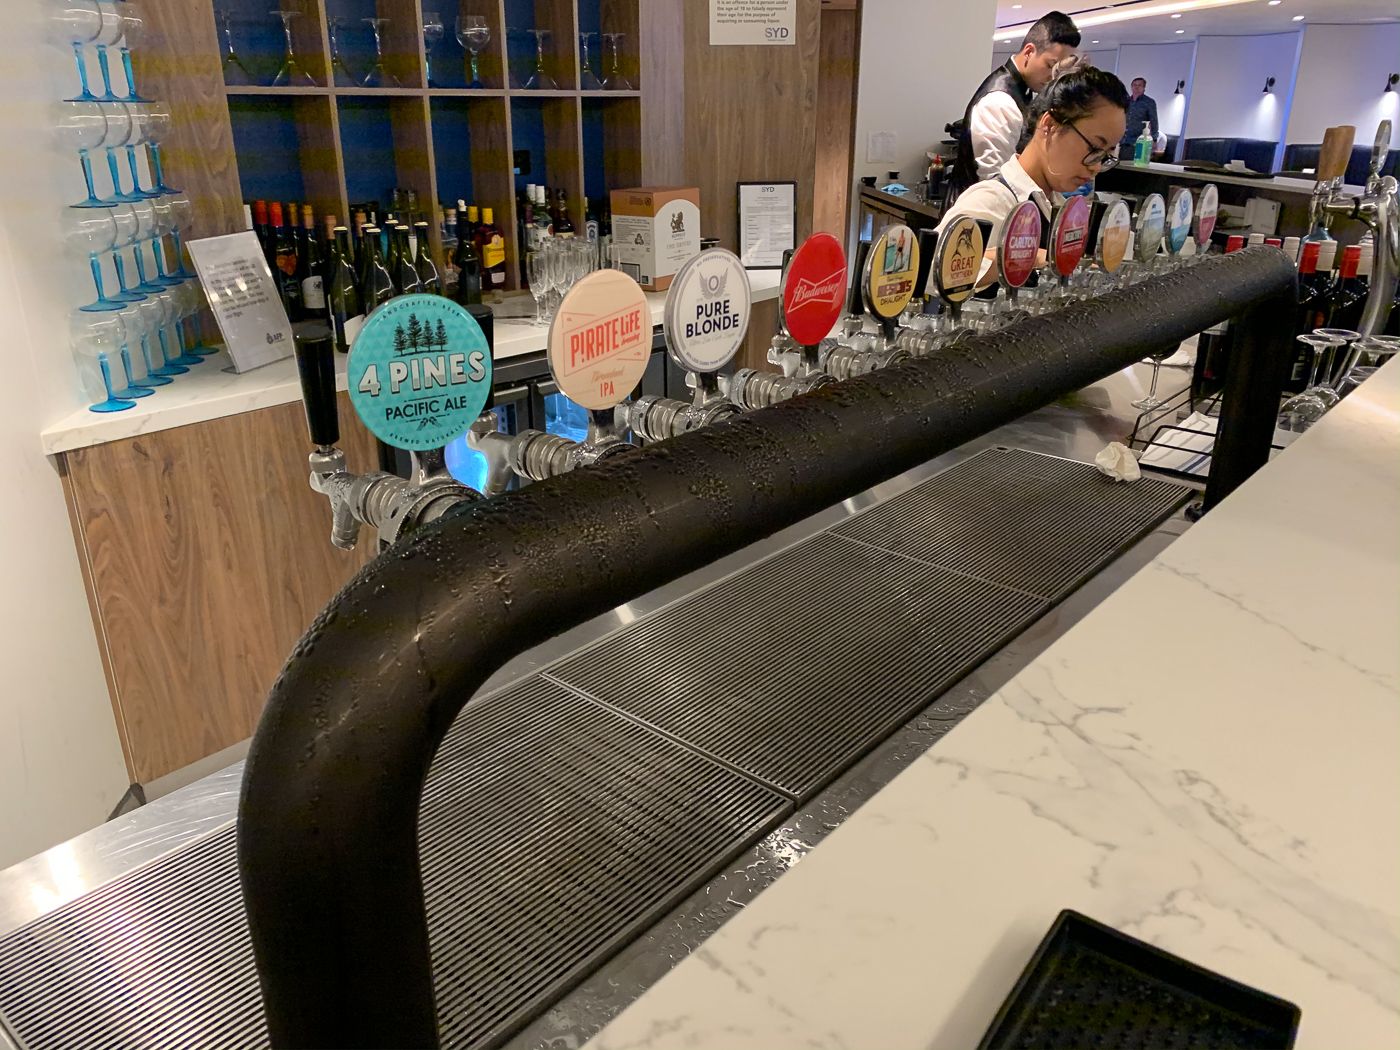 Review: New Sydney AMEX Lounge